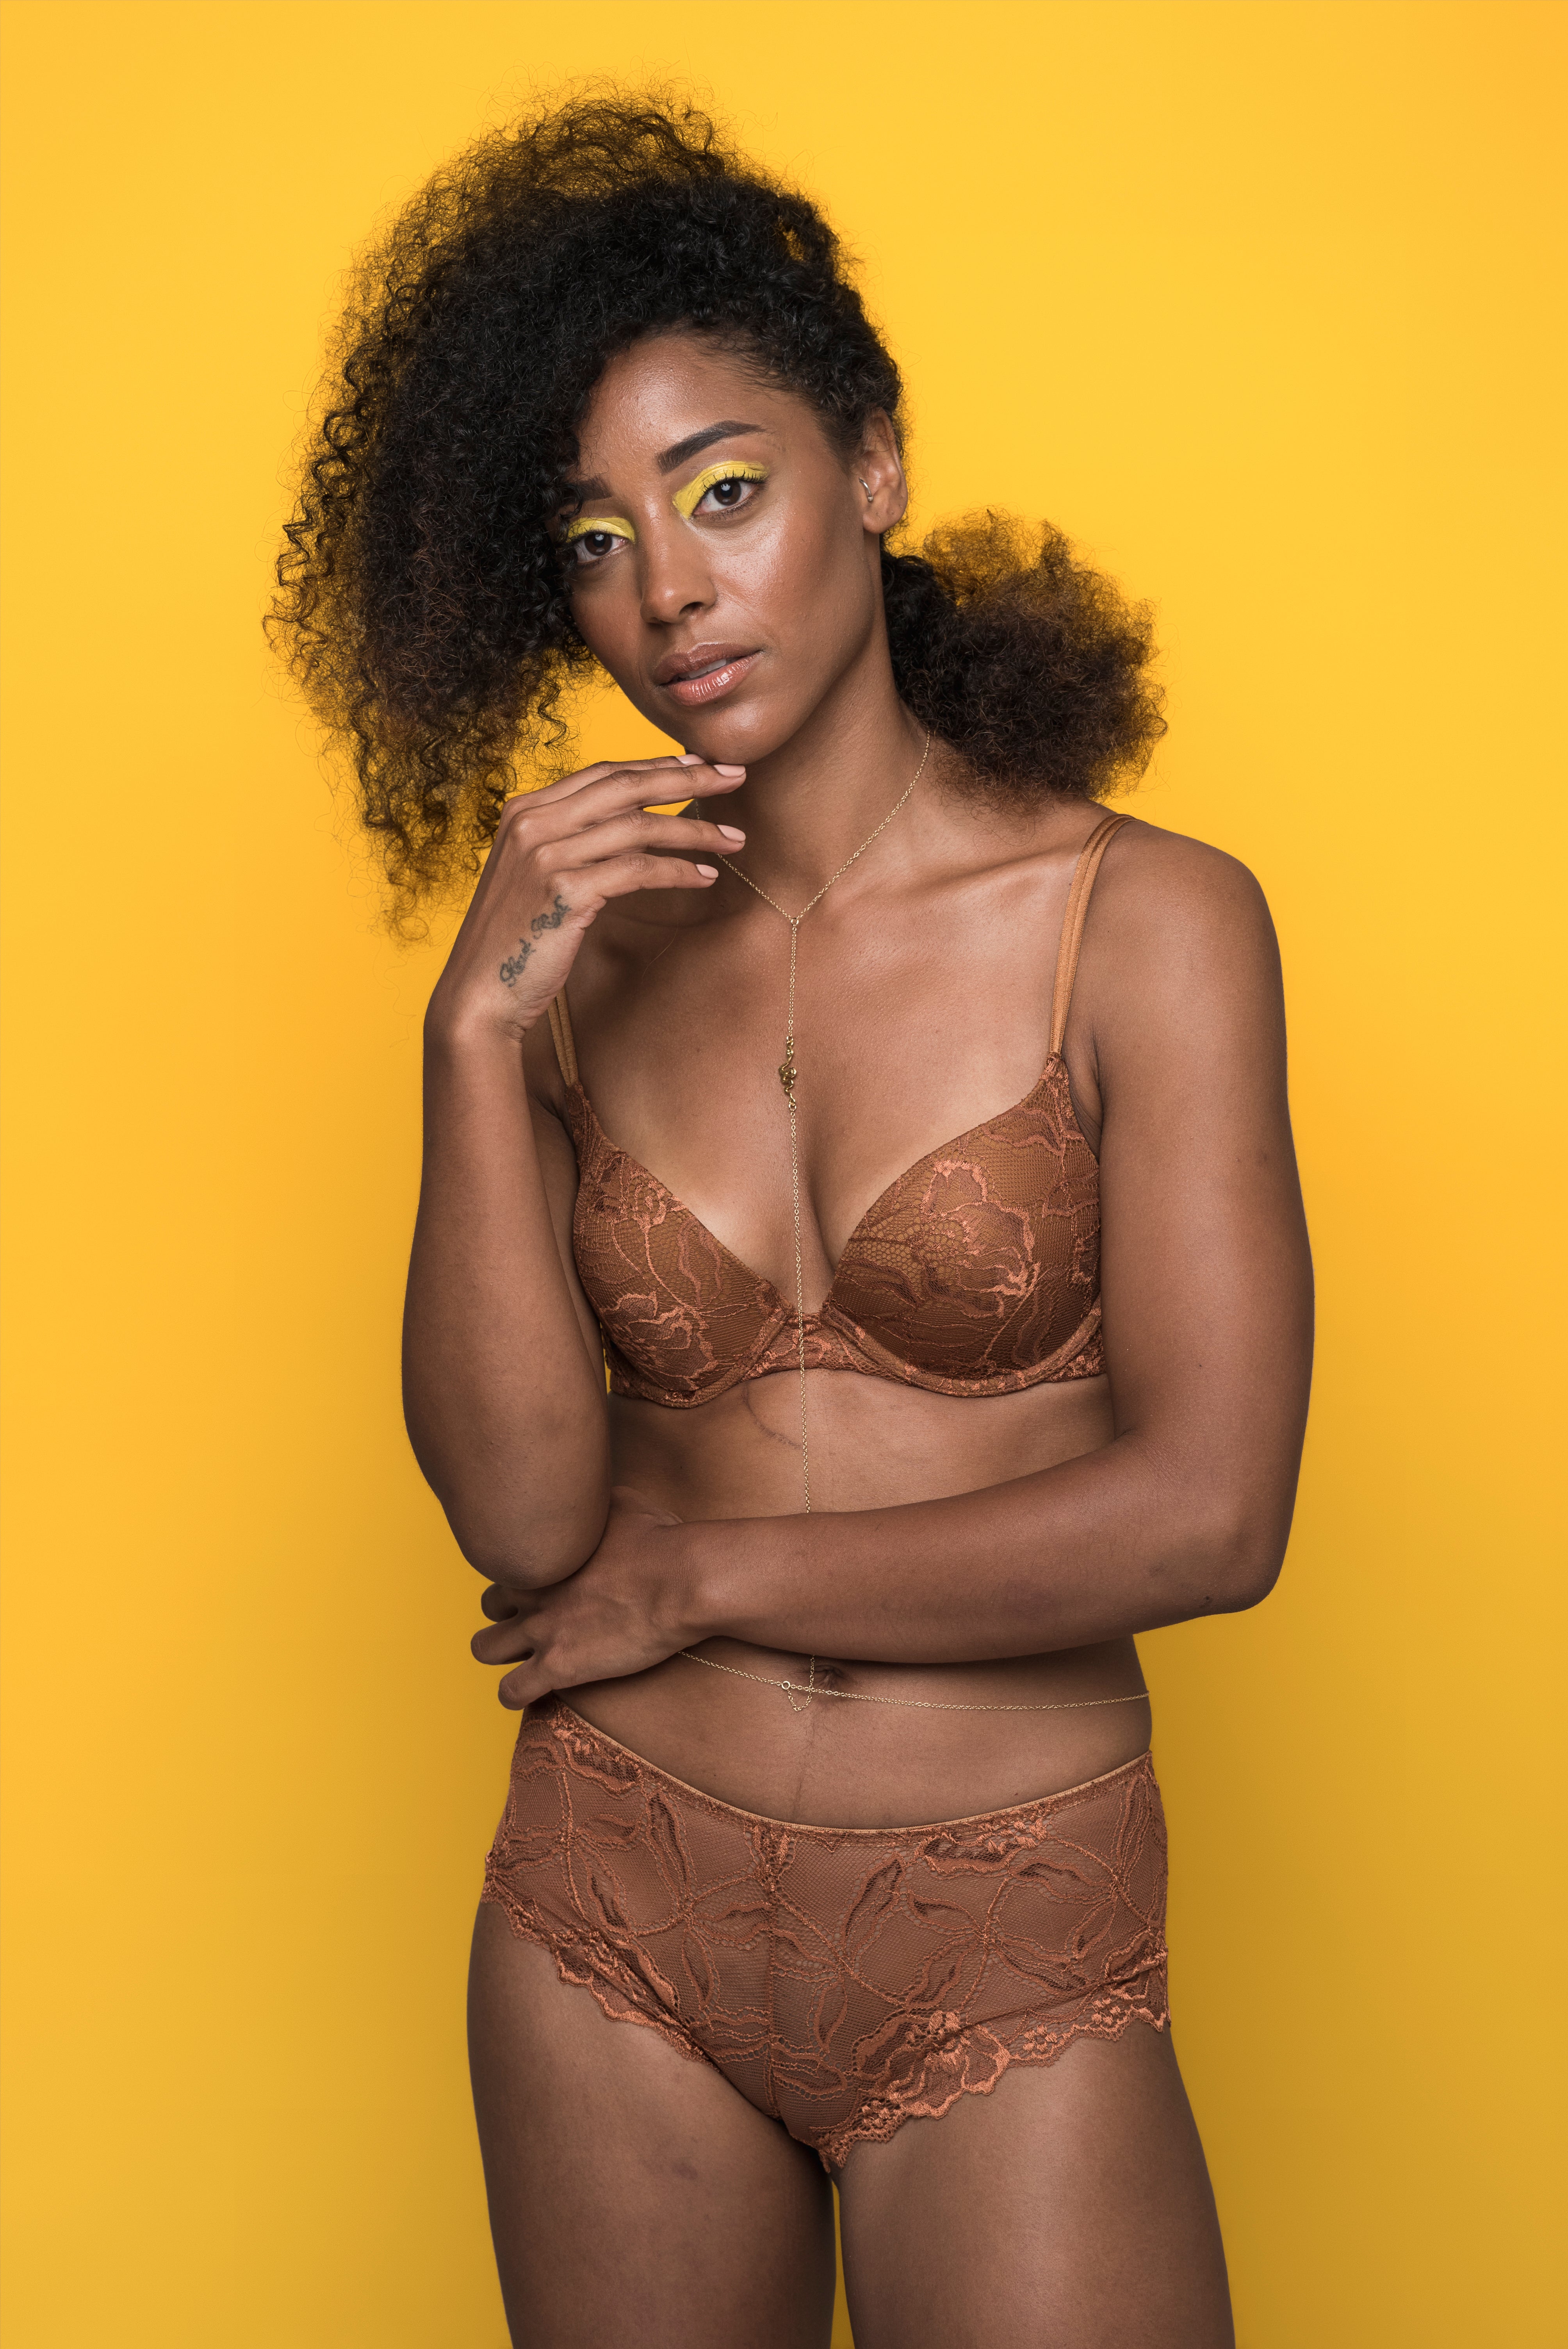 The Colored Girl Features Nubian Skin and Chiki Miki in ‘FULL BLOOM’ Campaign
